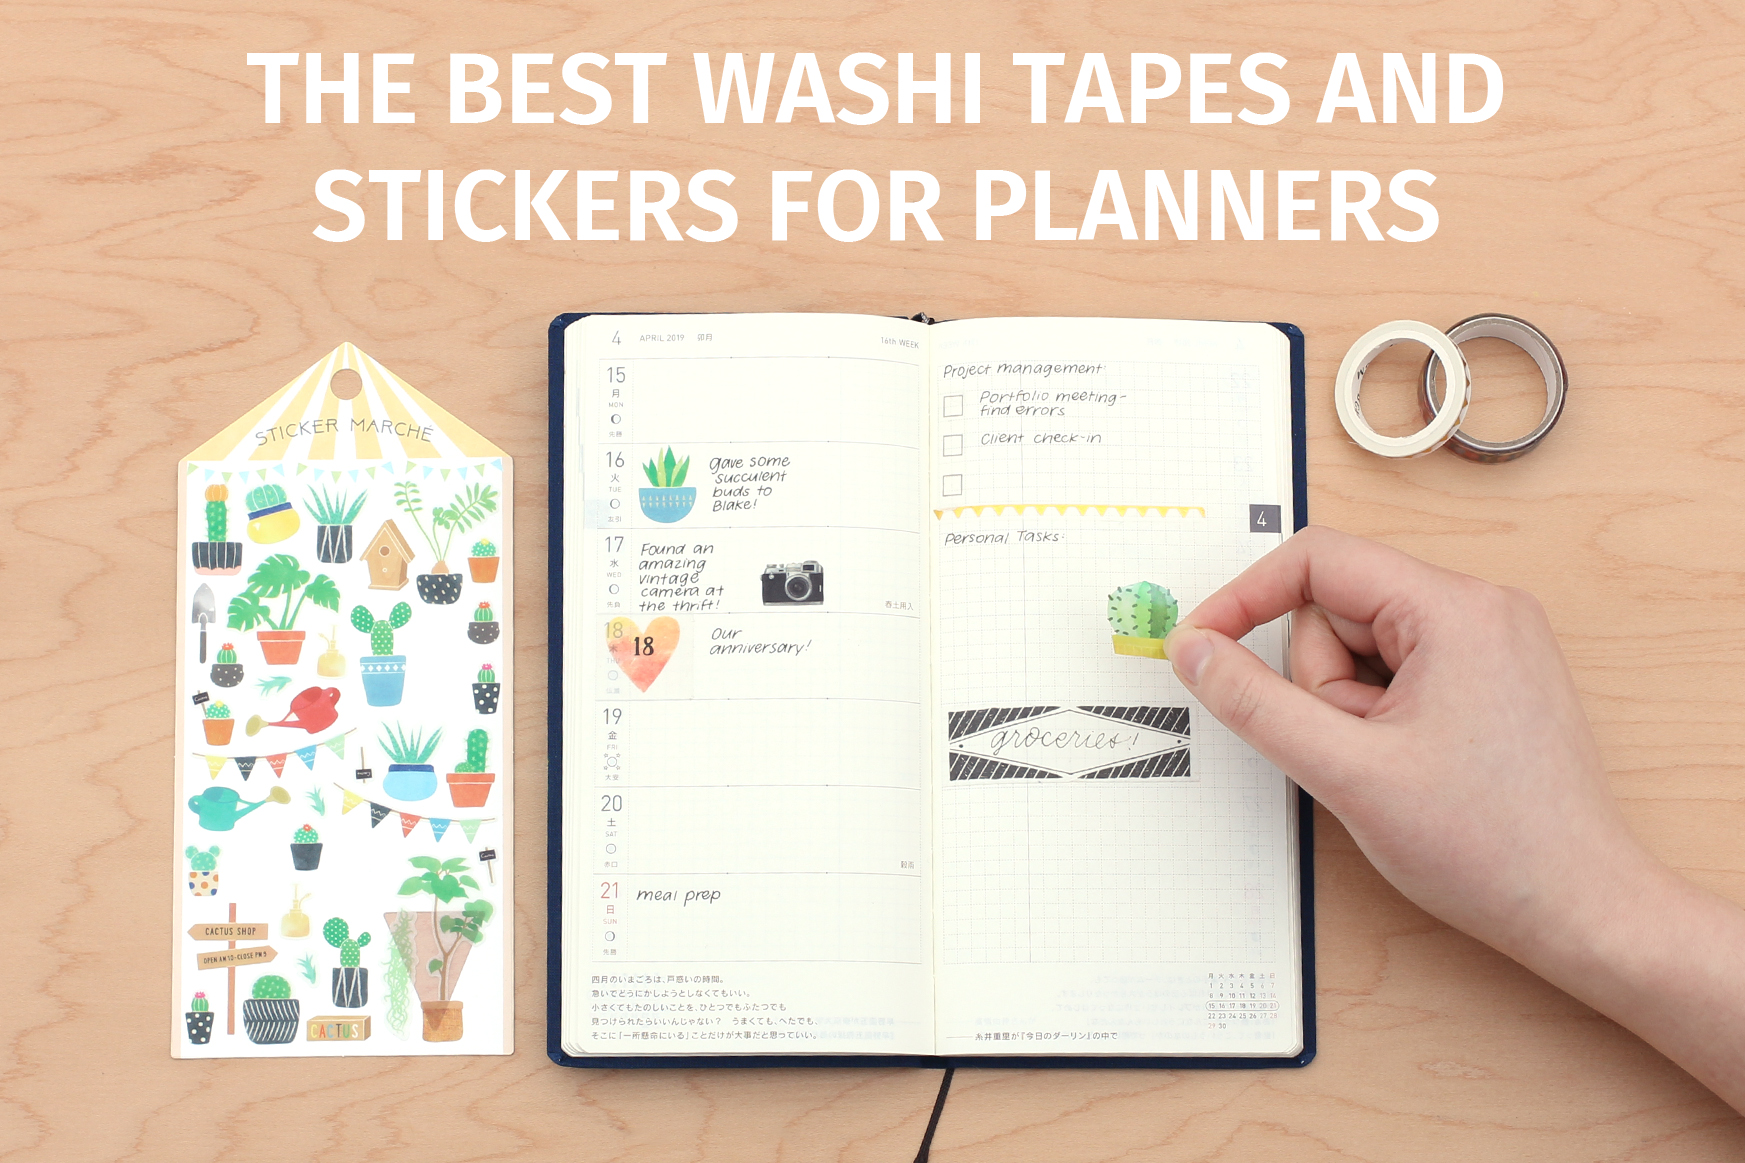 The Best Planner Washi Tapes and Stickers